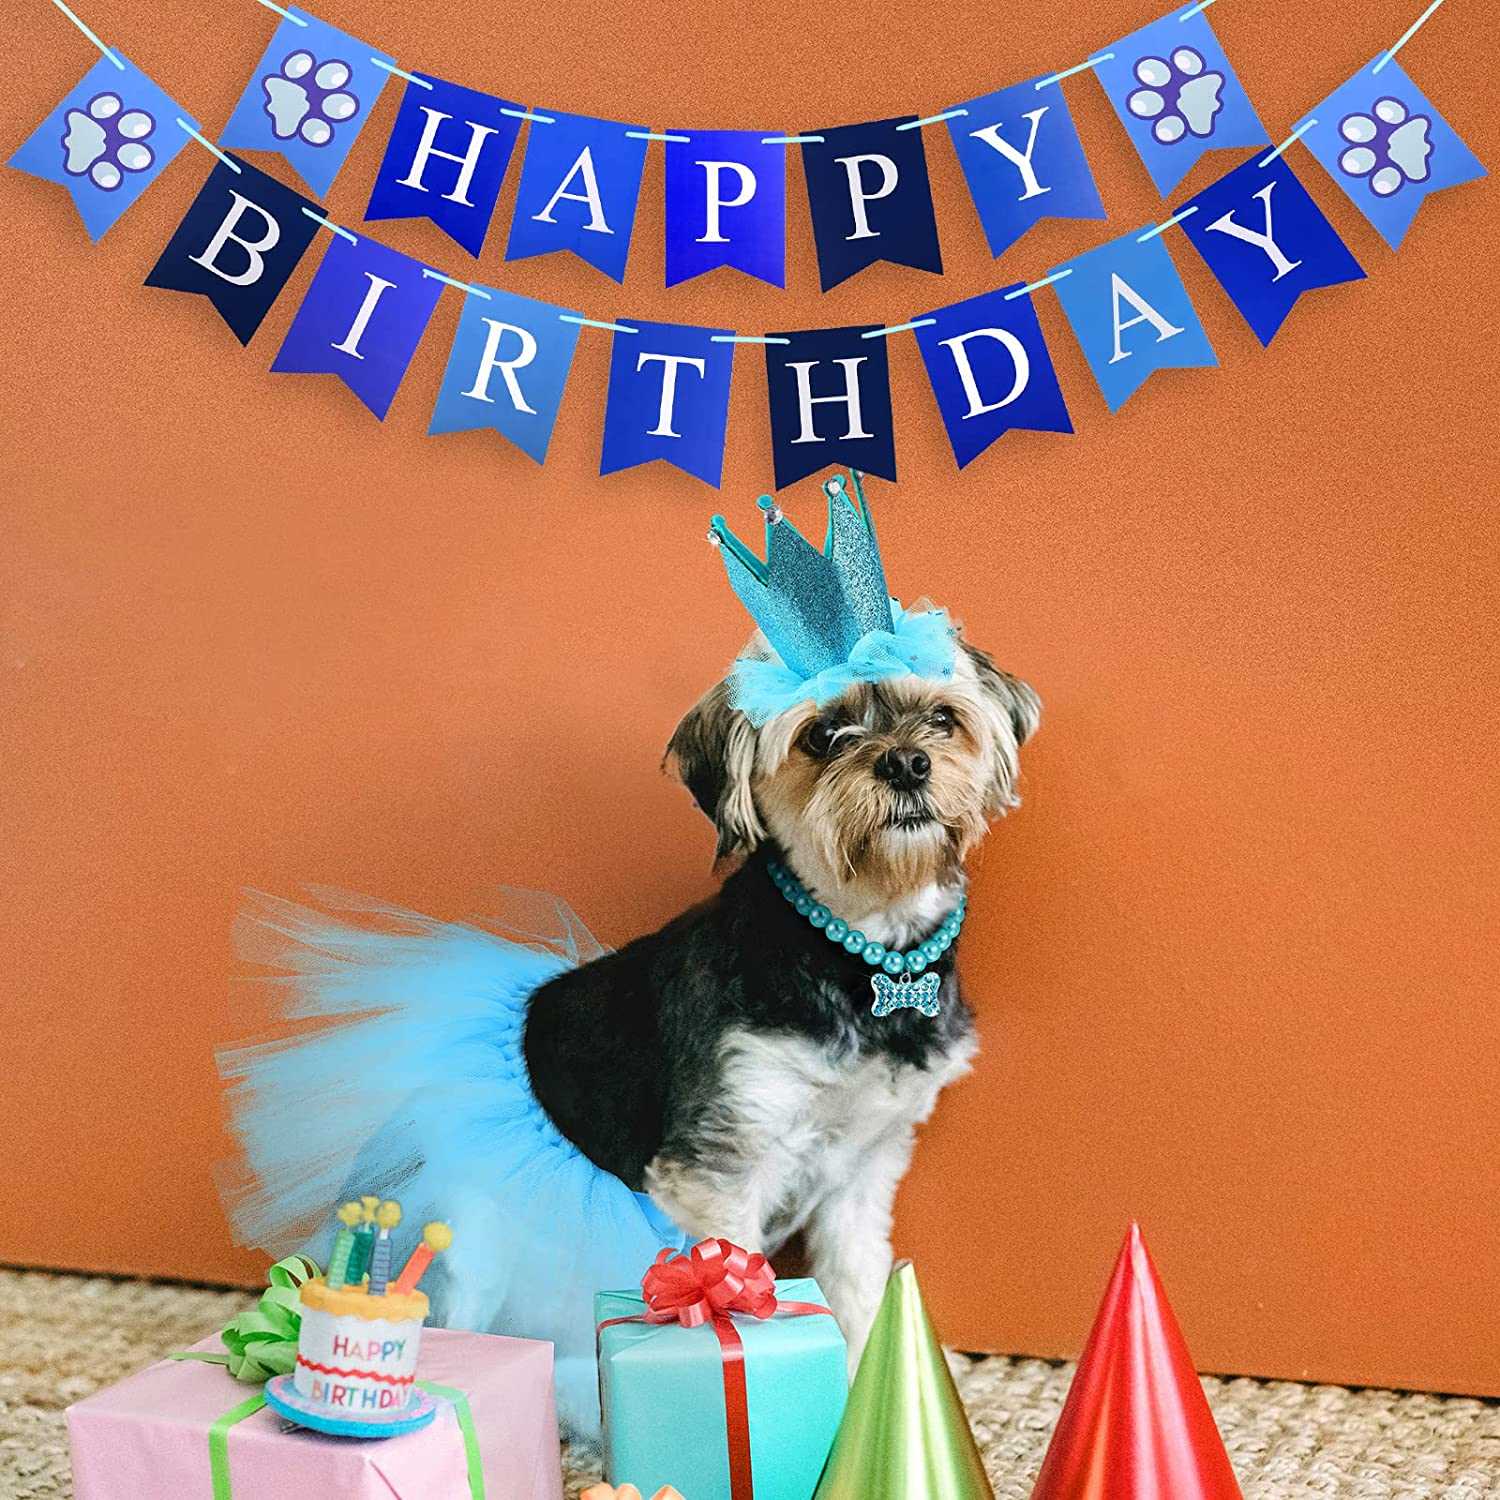 KUTKUT 4 Pieces Cute Dog Birthday Outfit with Pet Tutu Skirt Puppy Pearl Necklace Dog Crown Hat and Happy Birthday Banner for Puppy Dog Pet Cat Girl Birthday Party Supplies (Blue) - kutkutsty